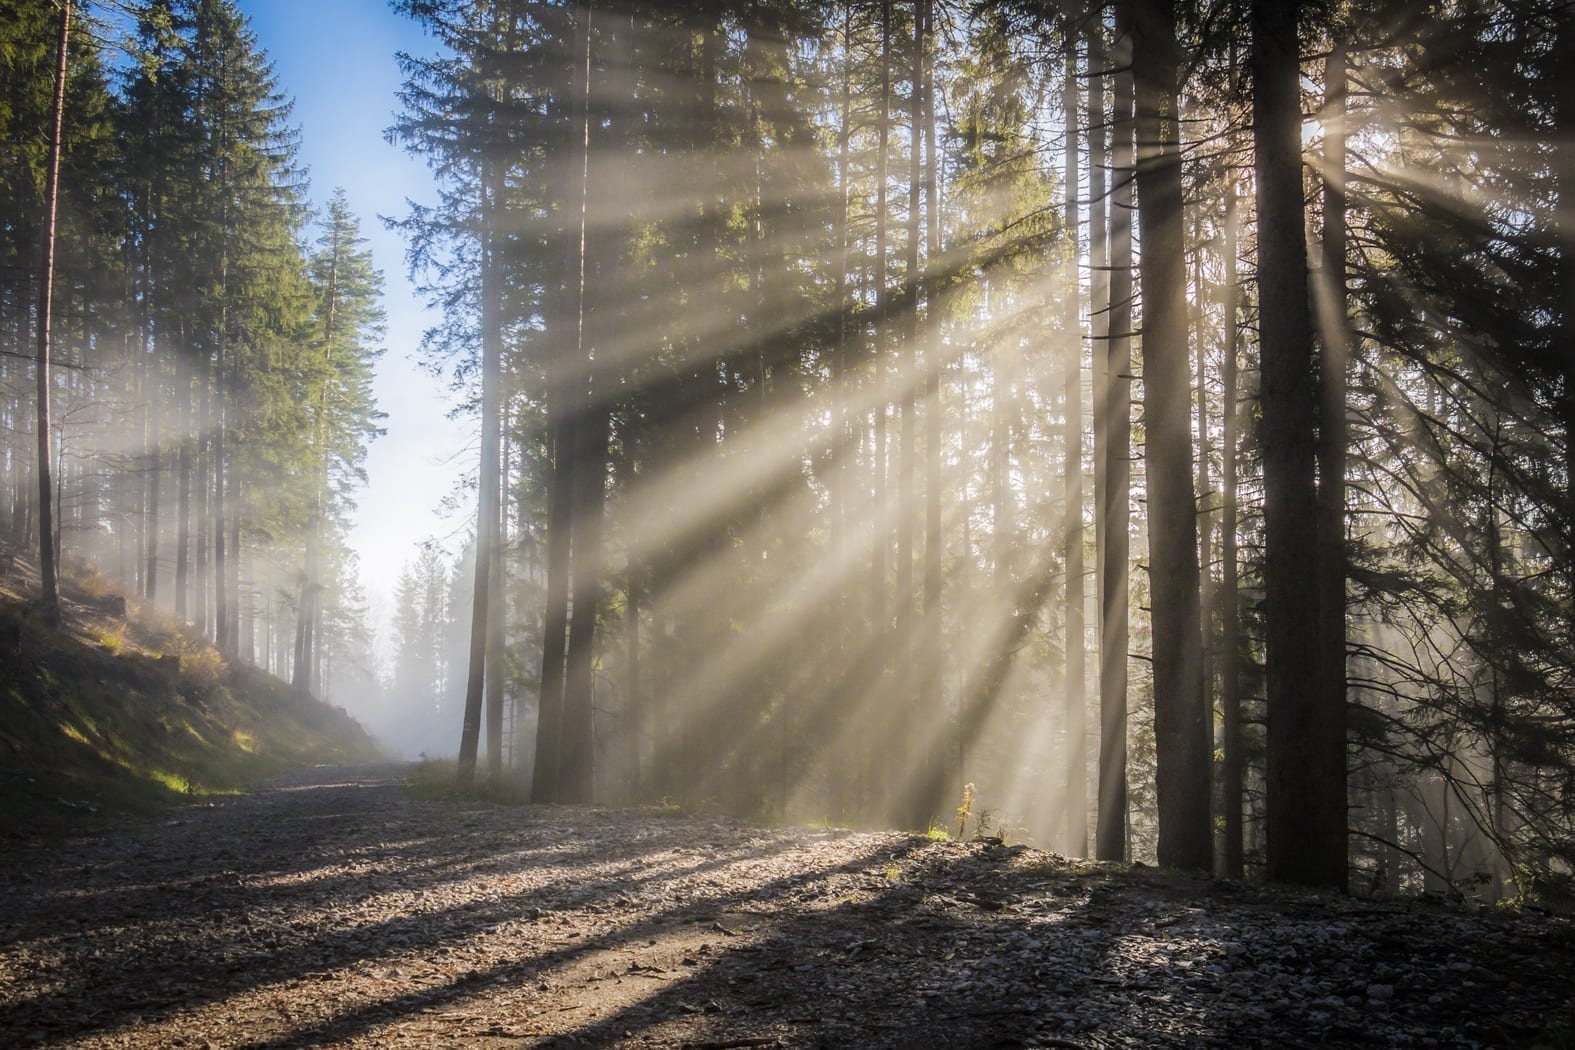 Light beams shining on mist in a forest, photo credit: Pxhere